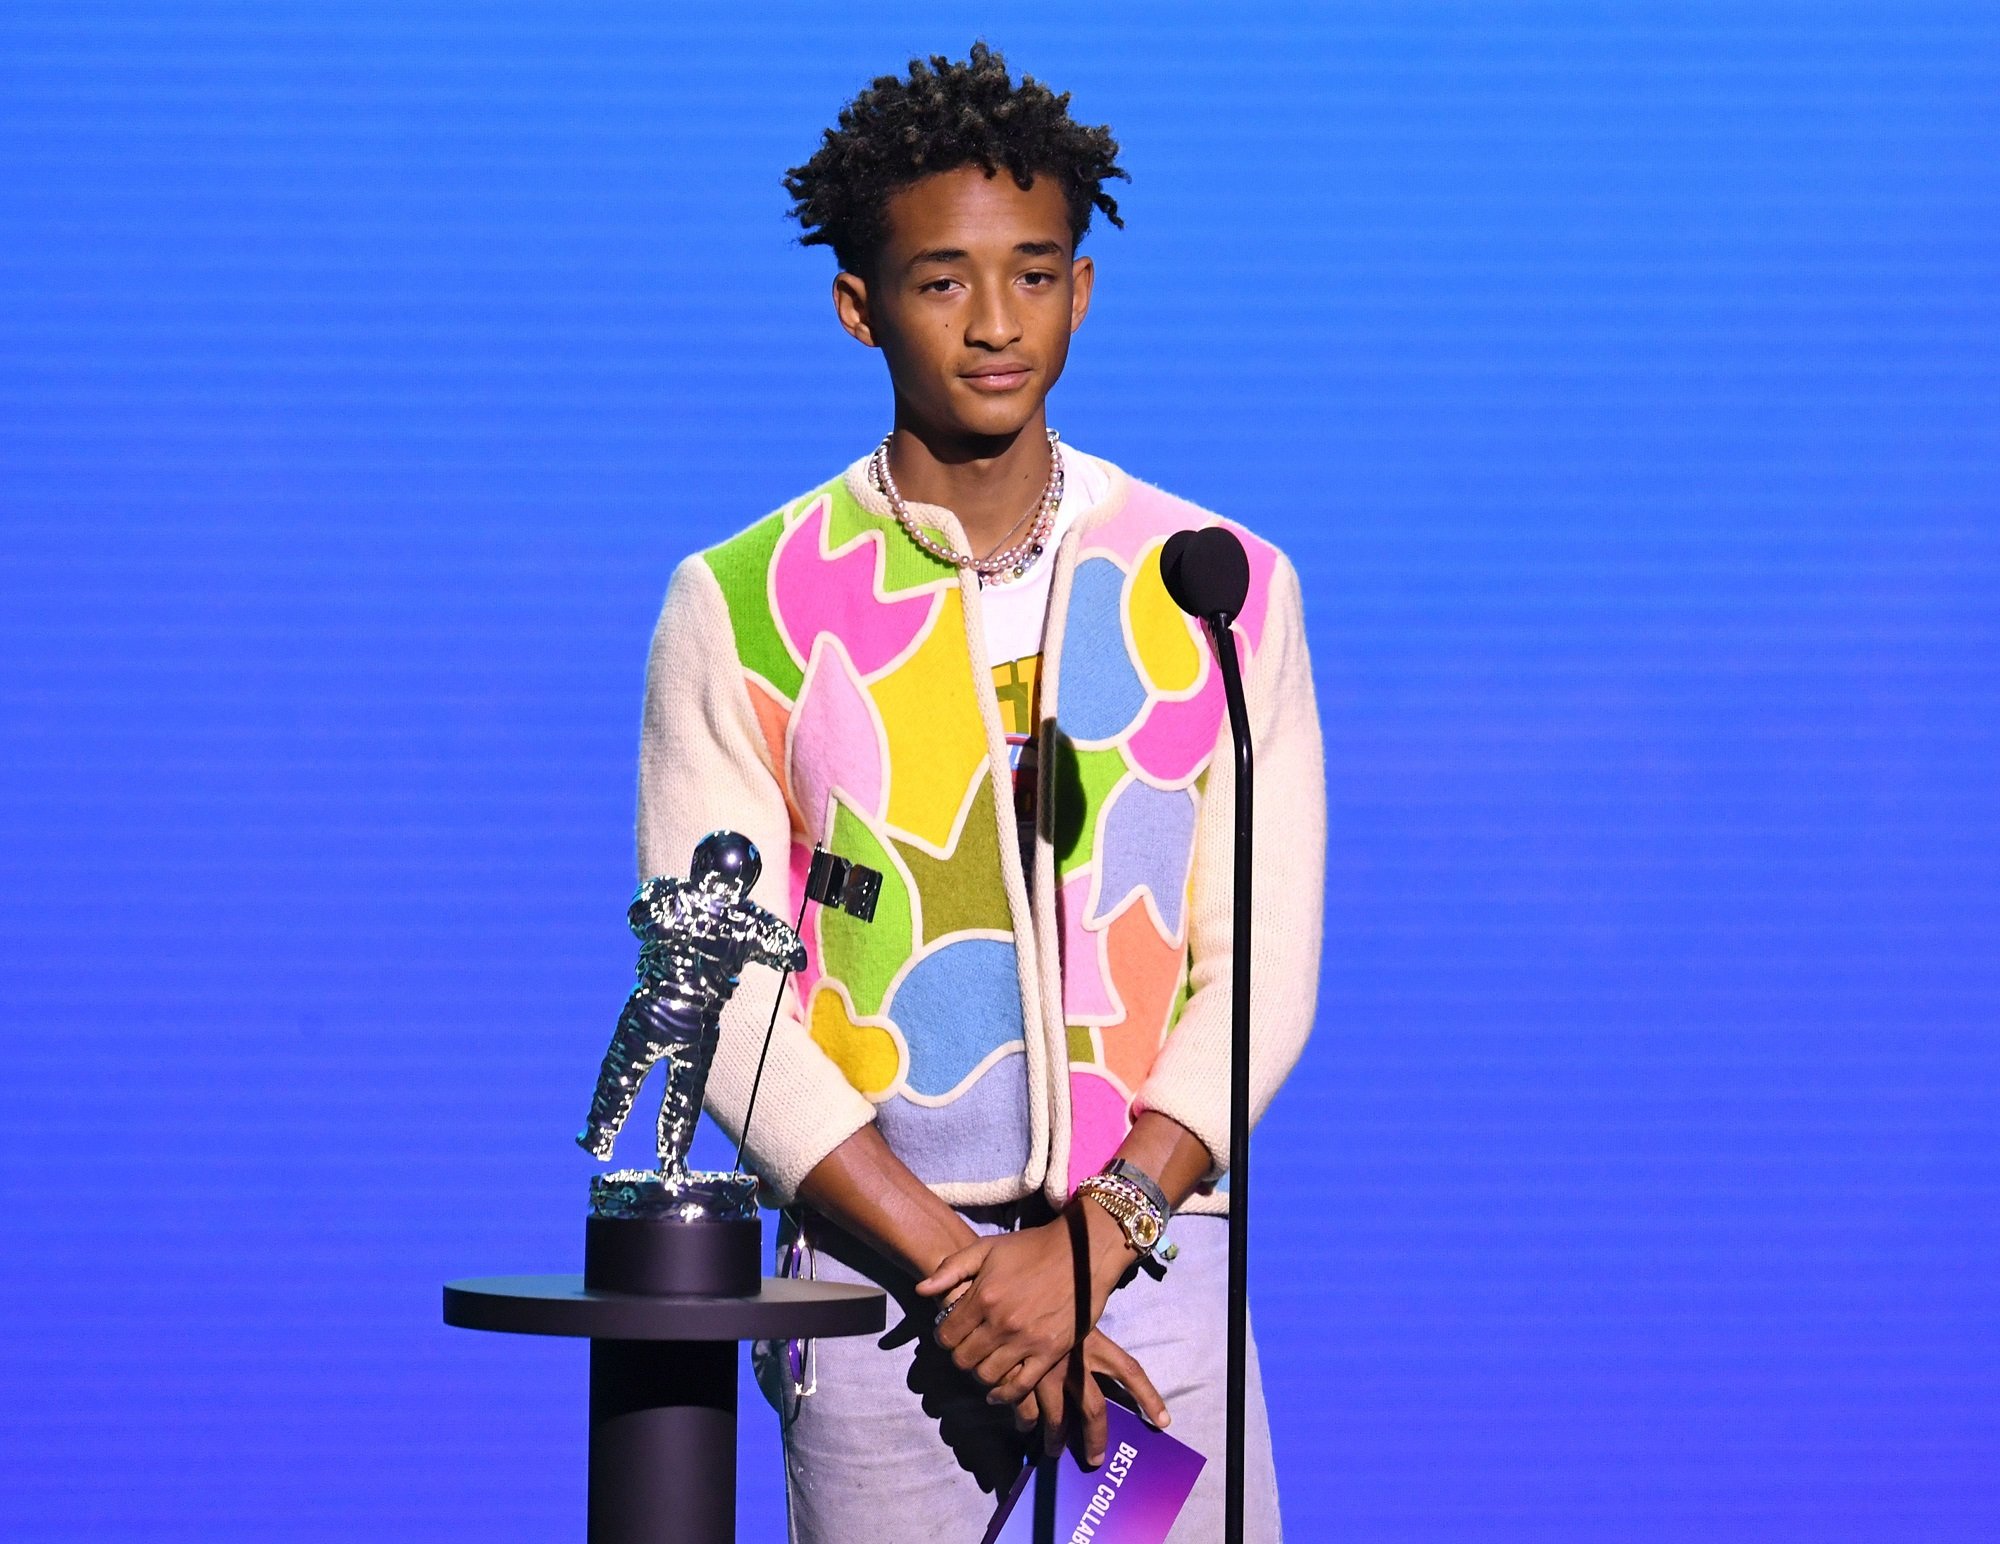 What is Jaden Smith's 2020 Net Worth, And How Does He Earn His Money?